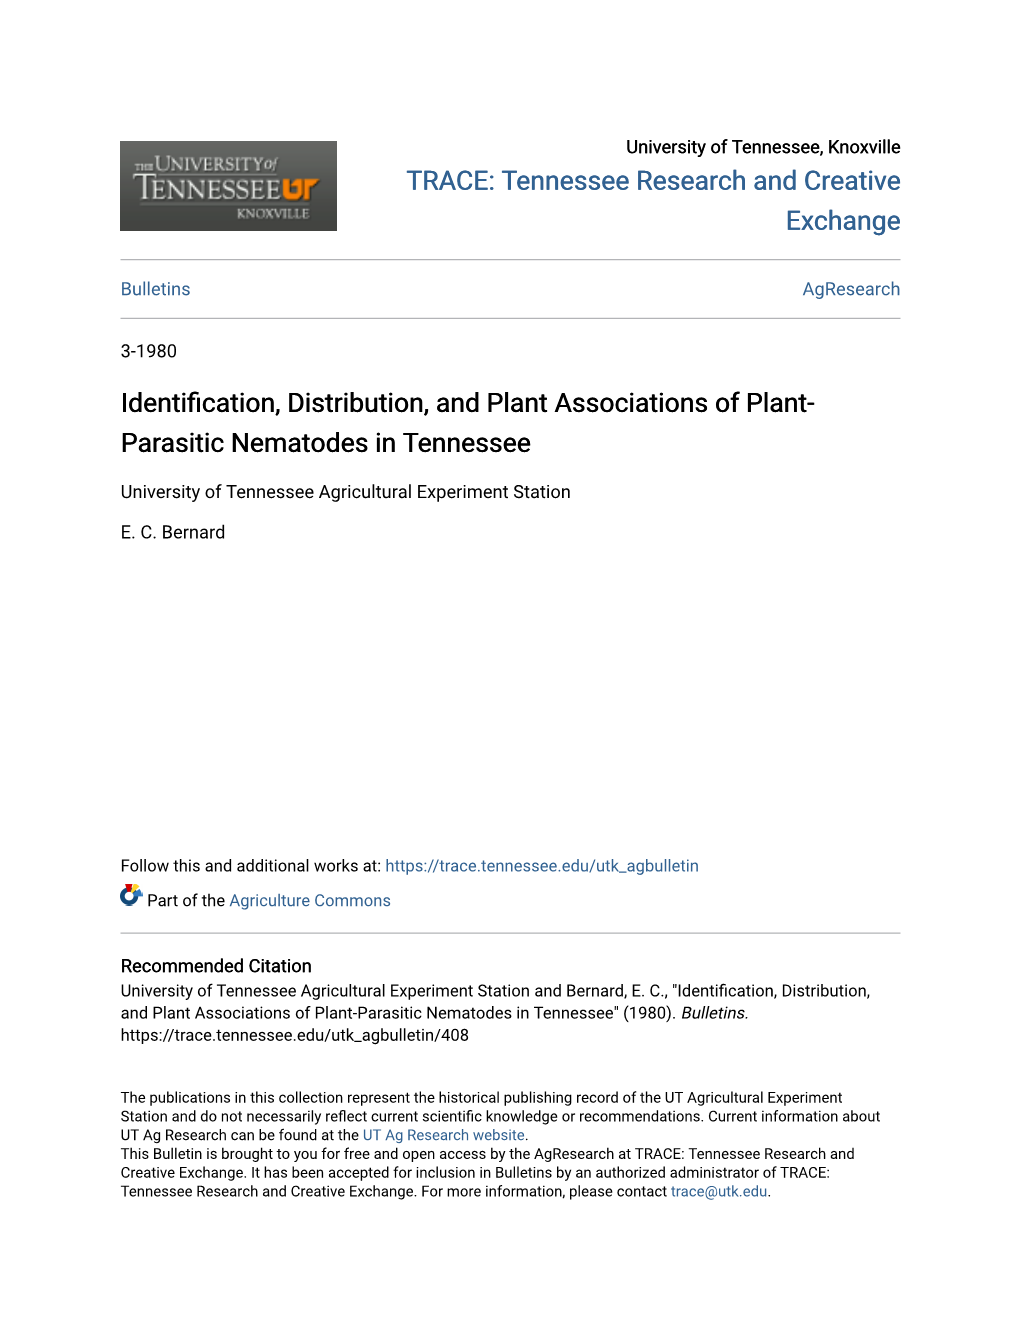 Identification, Distribution, and Plant Associations of Plant-Parasitic Nematodes in Tennessee" (1980)